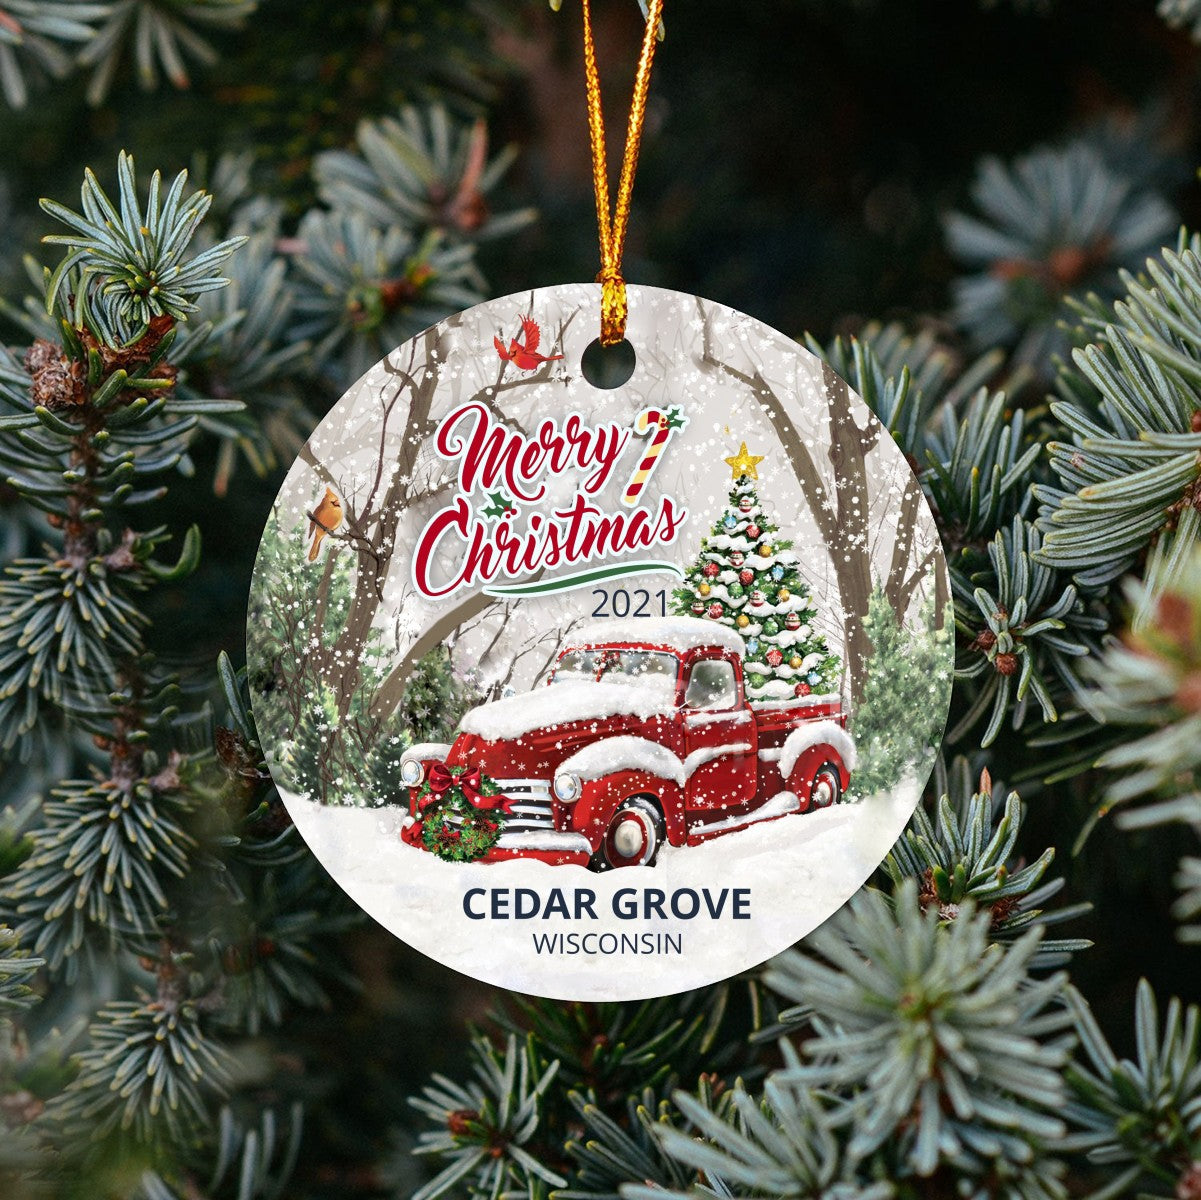 Christmas Tree Ornaments Cedar Grove - Ornament With Name City, State Cedar Grove Wisconsin WI Ornament - Red Truck Xmas Ornaments 3'' Plastic Gift For Family, Friend And Housewarming